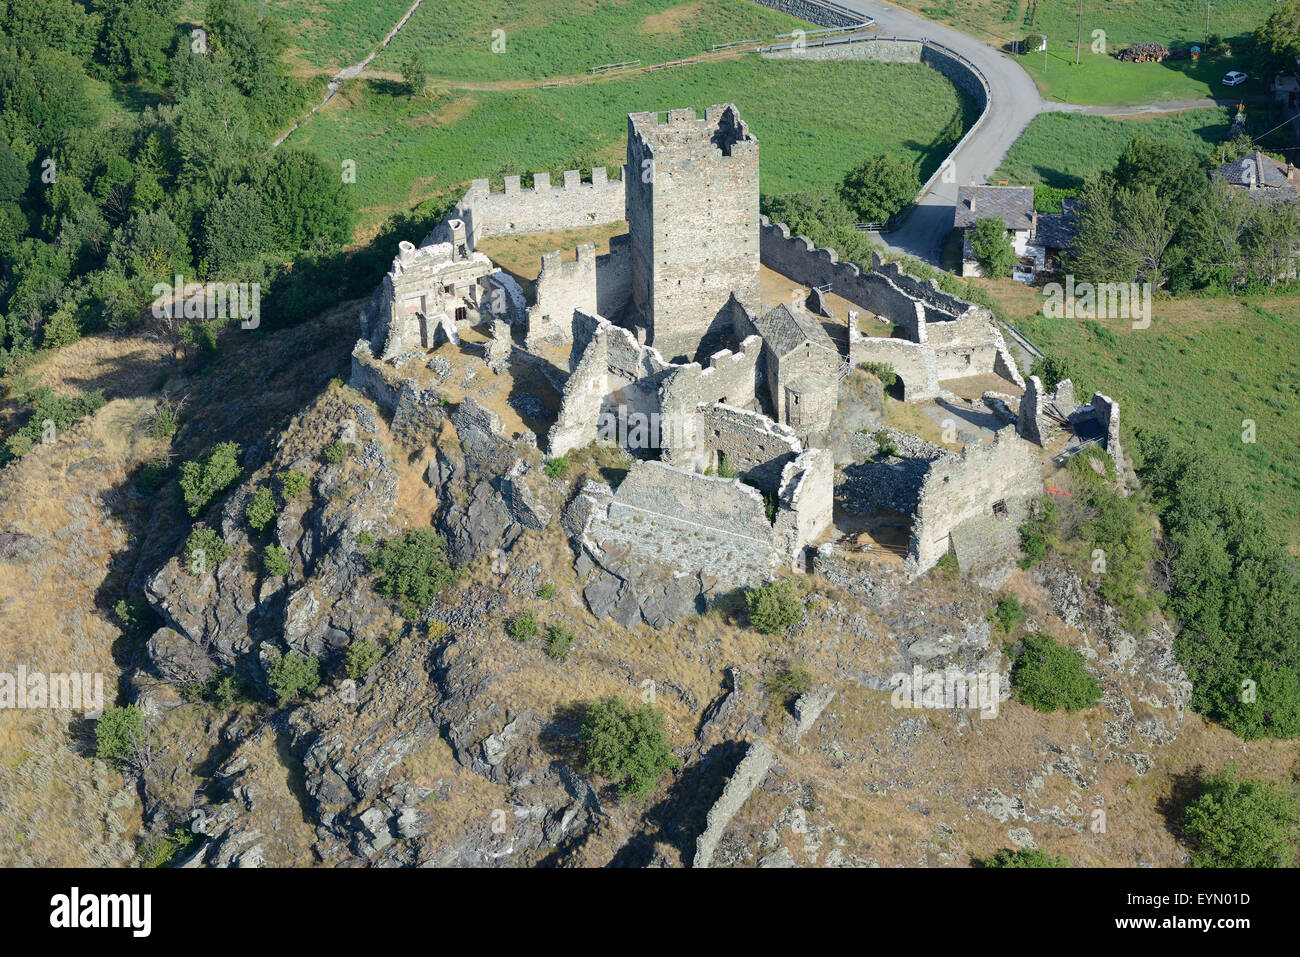 AERIAL VIEW. Ruins of Cly Castle. Saint-Denis, Aosta Valley, Italy. Stock Photo